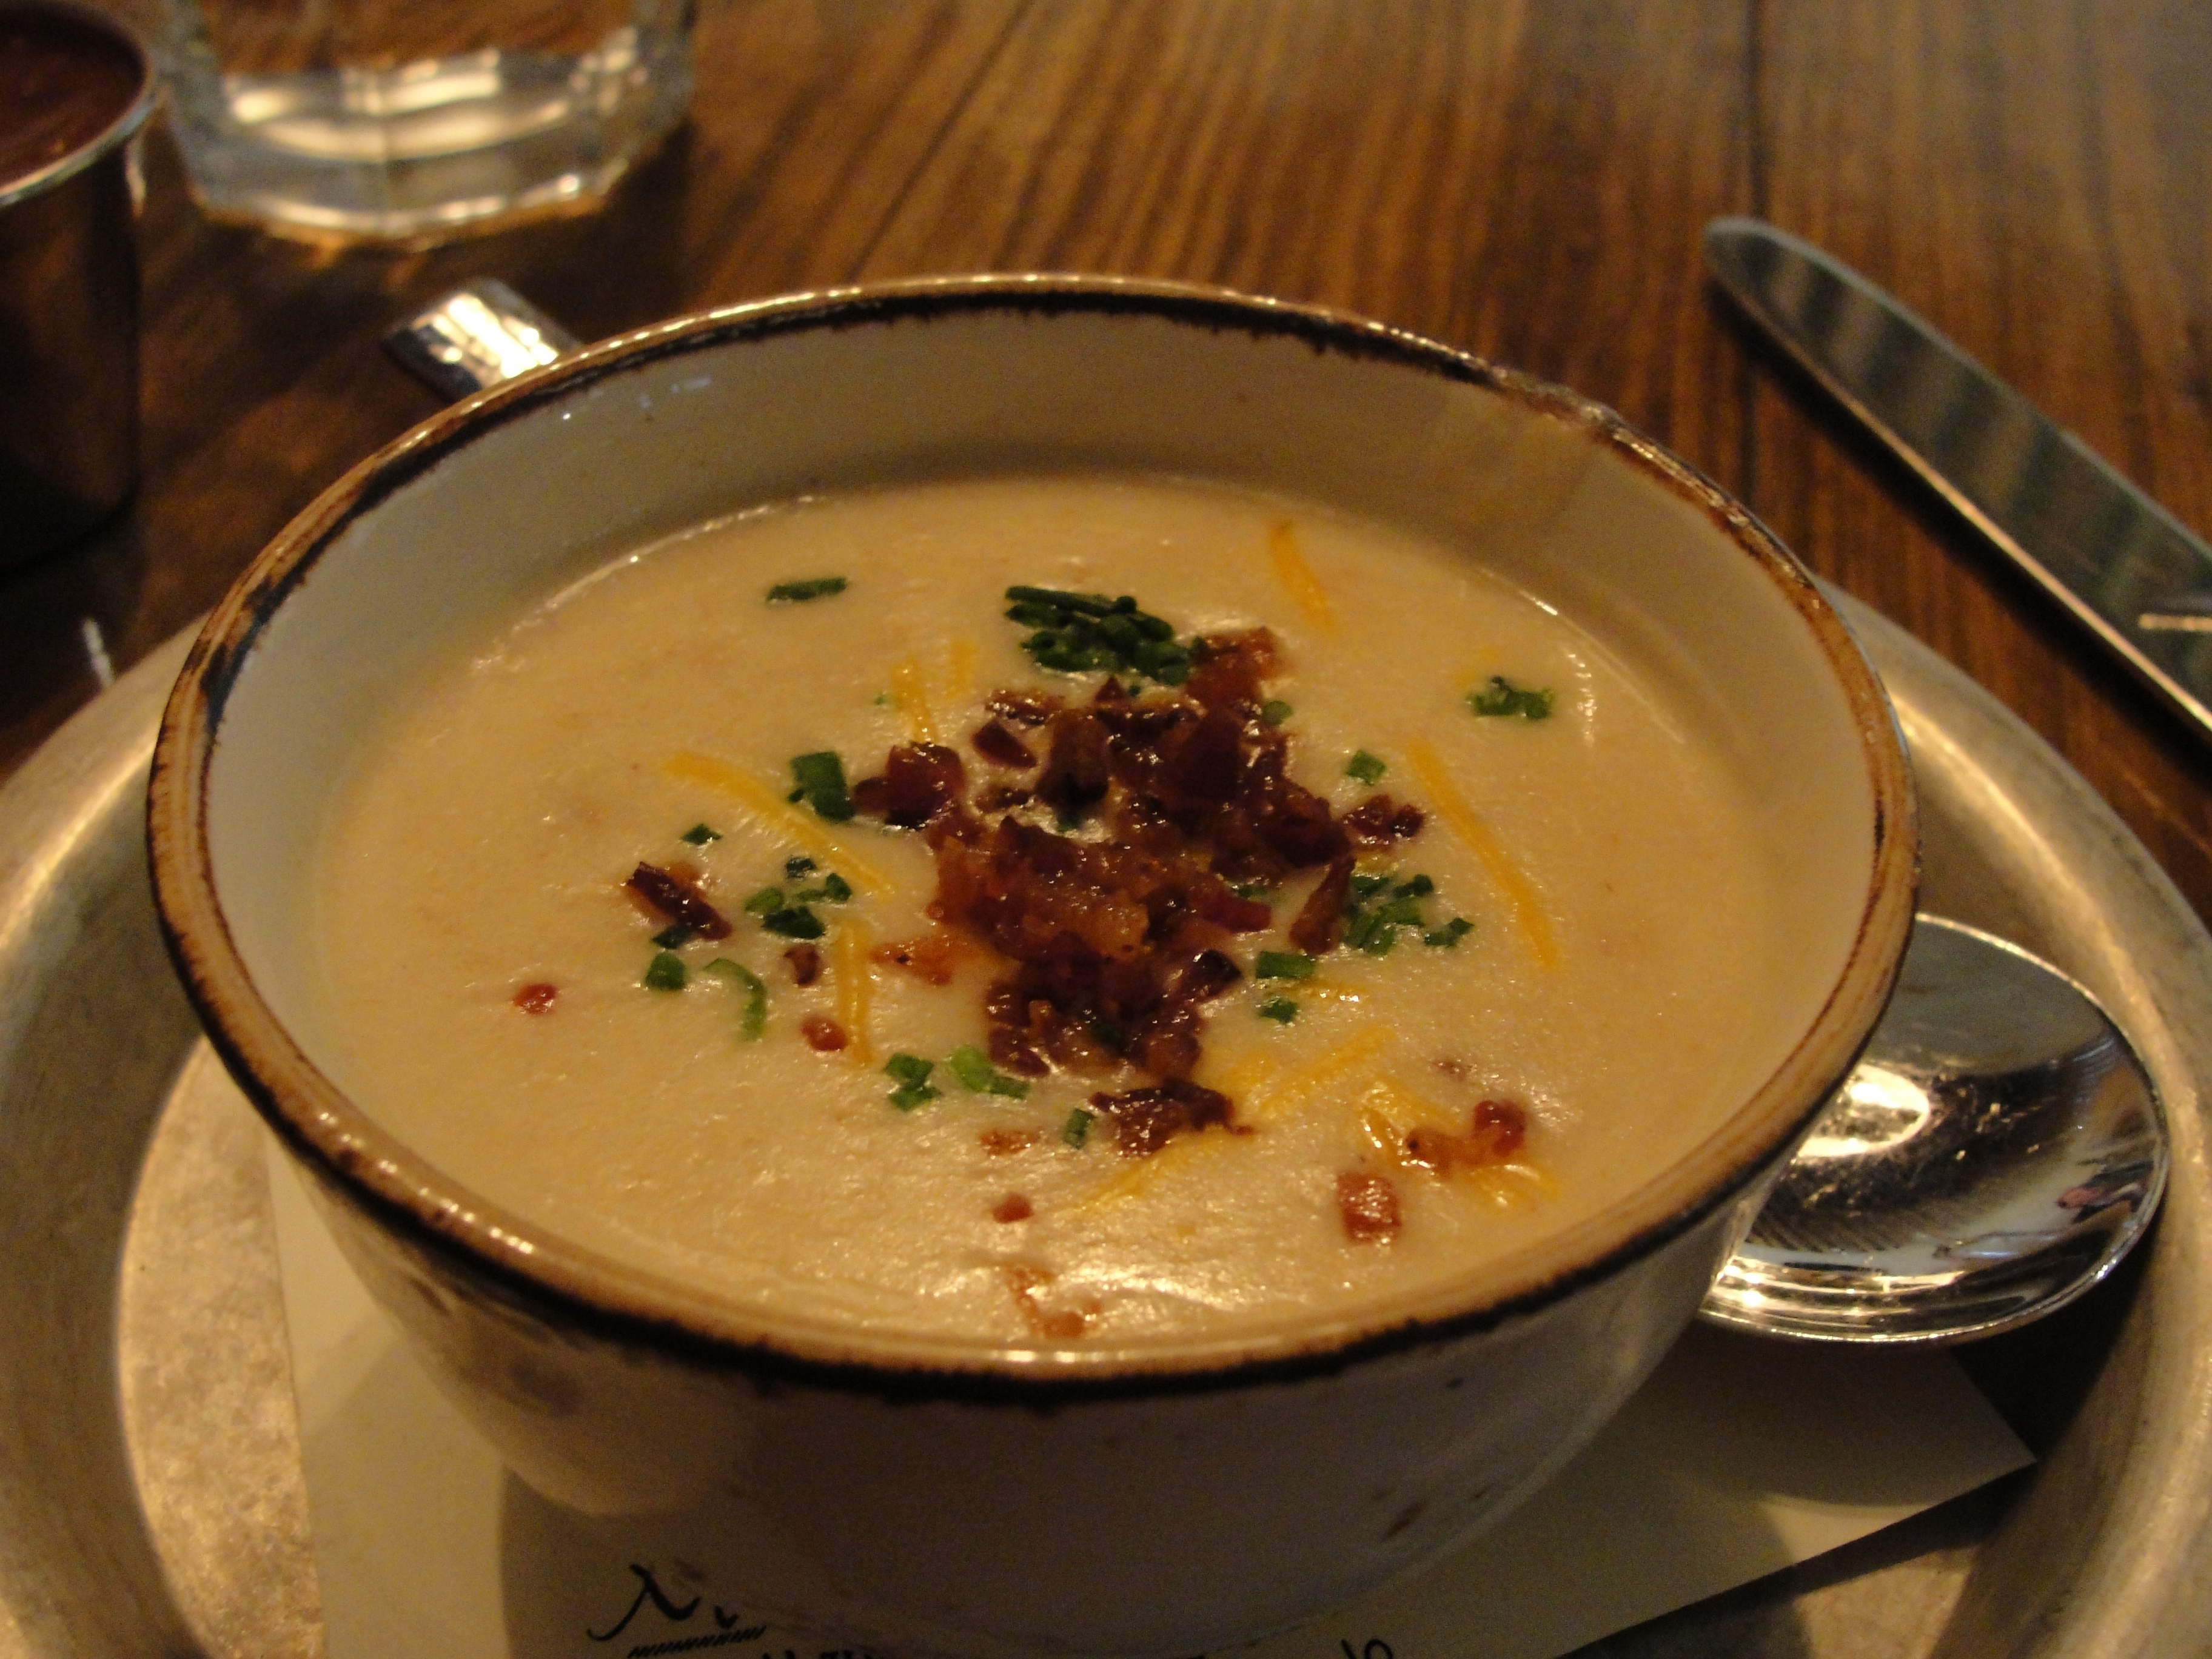 Back for more soup! This time around: Potato Soup